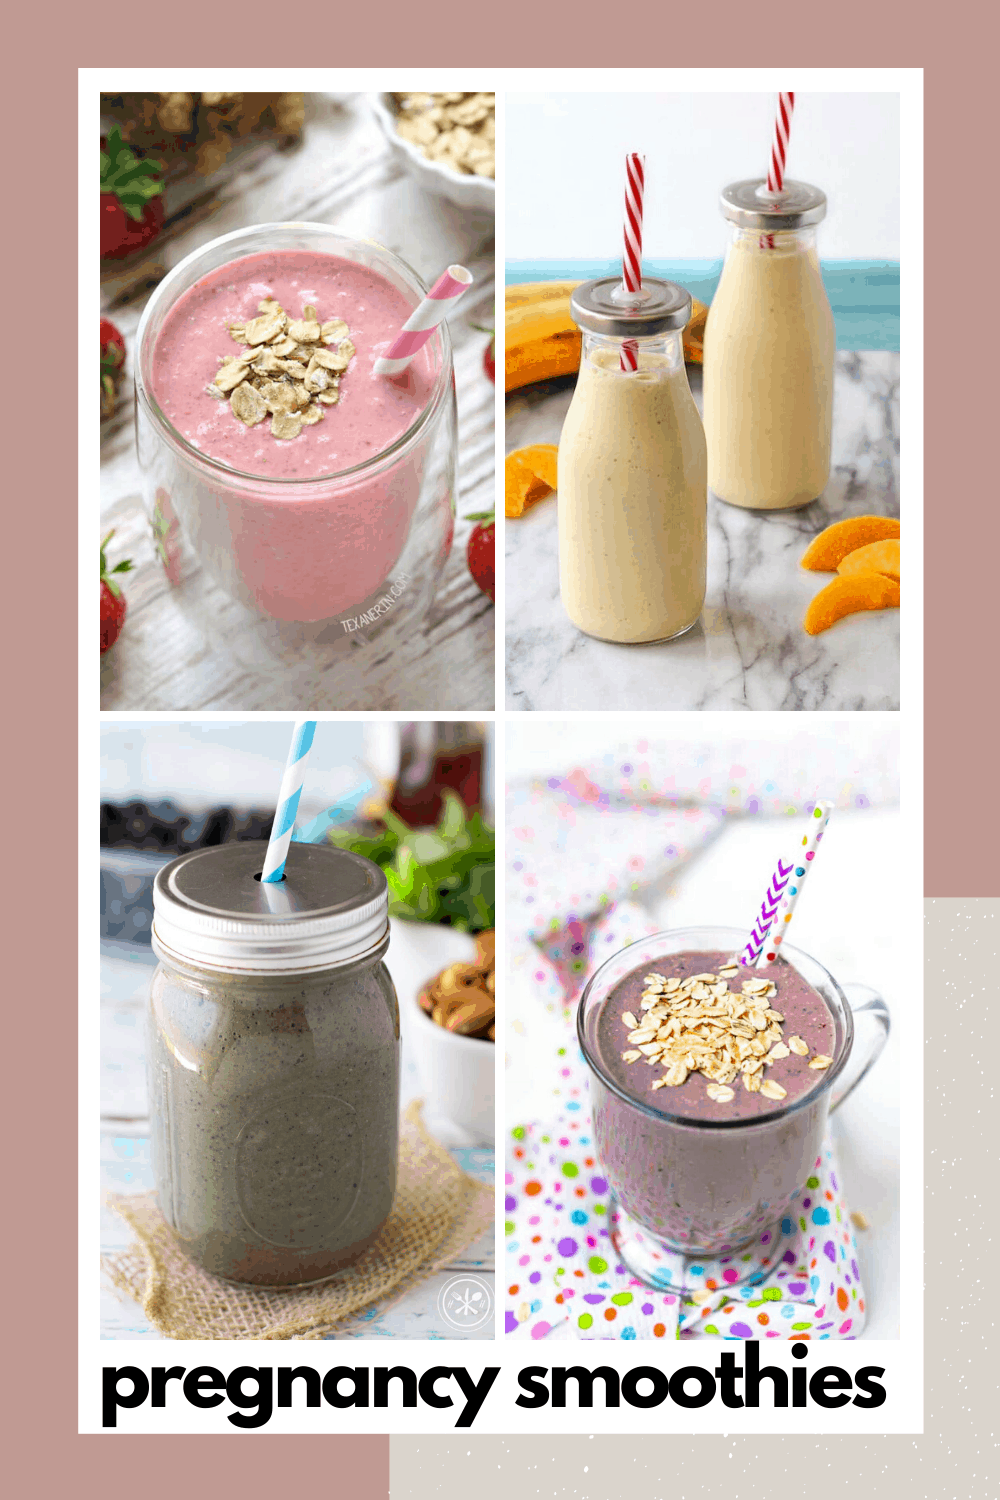 If you're feeling nauseous and can't face solid foods check out these healthy pregnancy smoothie recipes